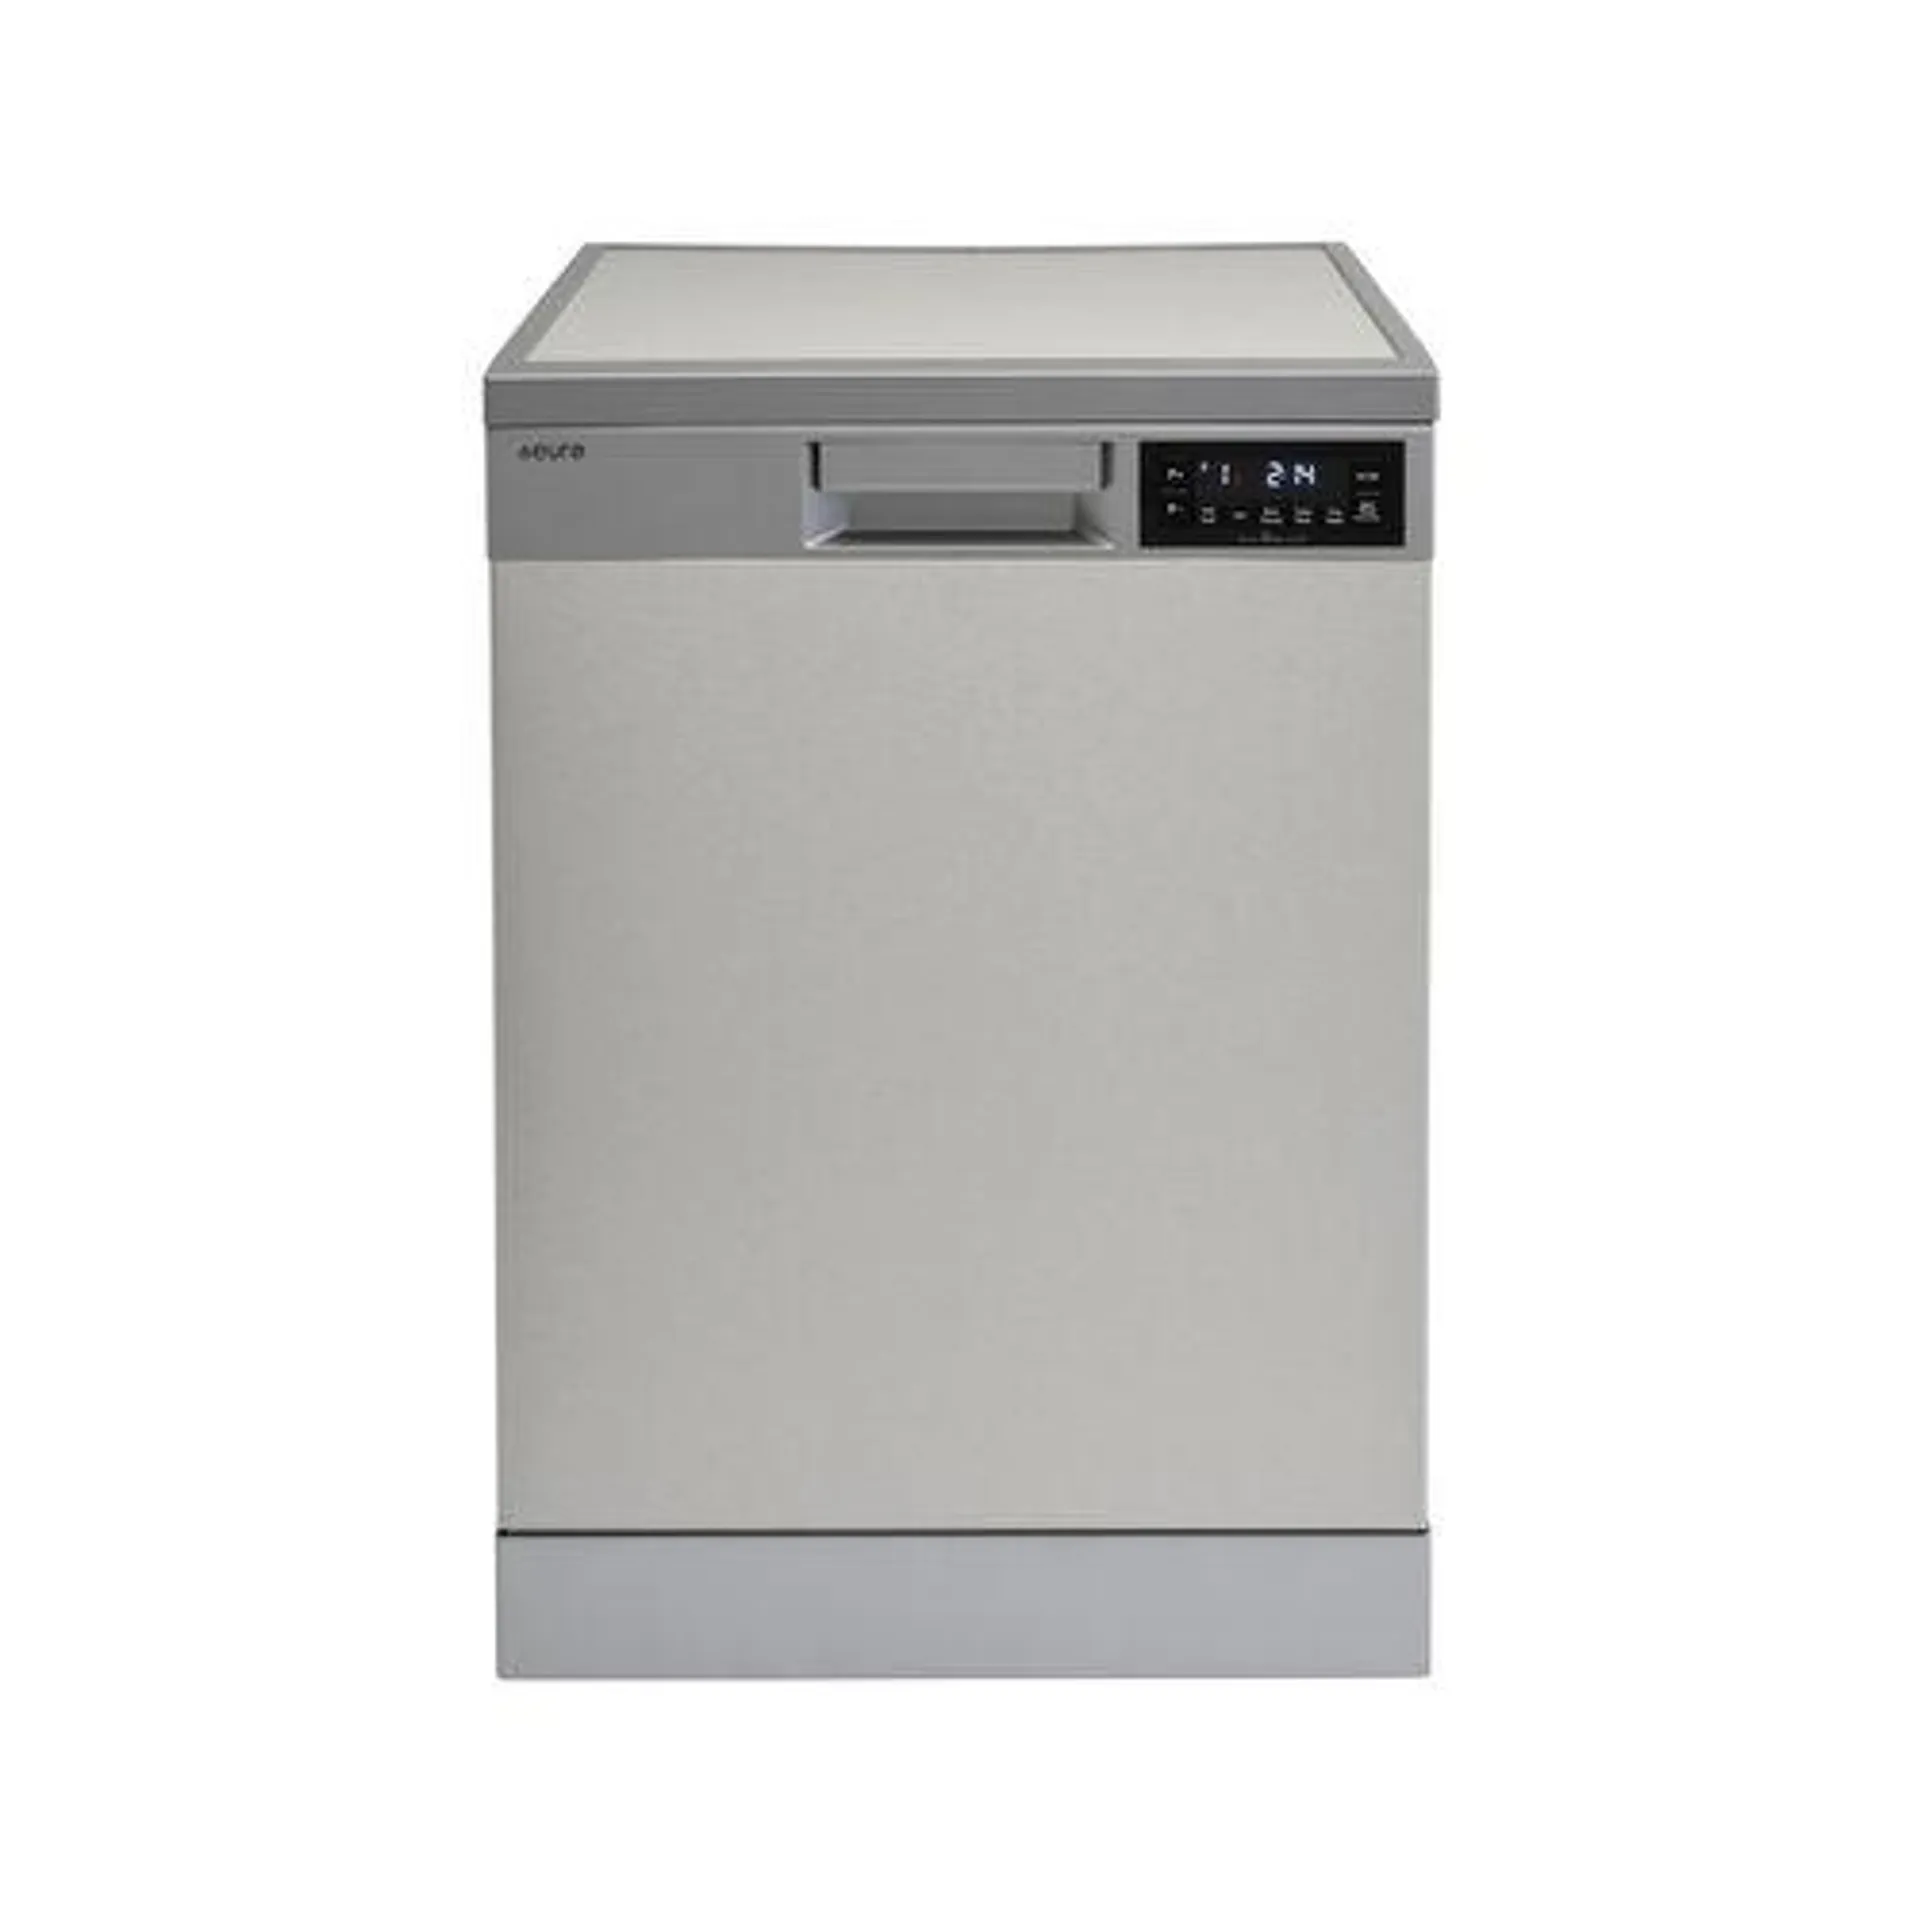 Euro 60cm 8 Cycle Dishwasher - Trade Only WELS 4 Star 13.8L/W